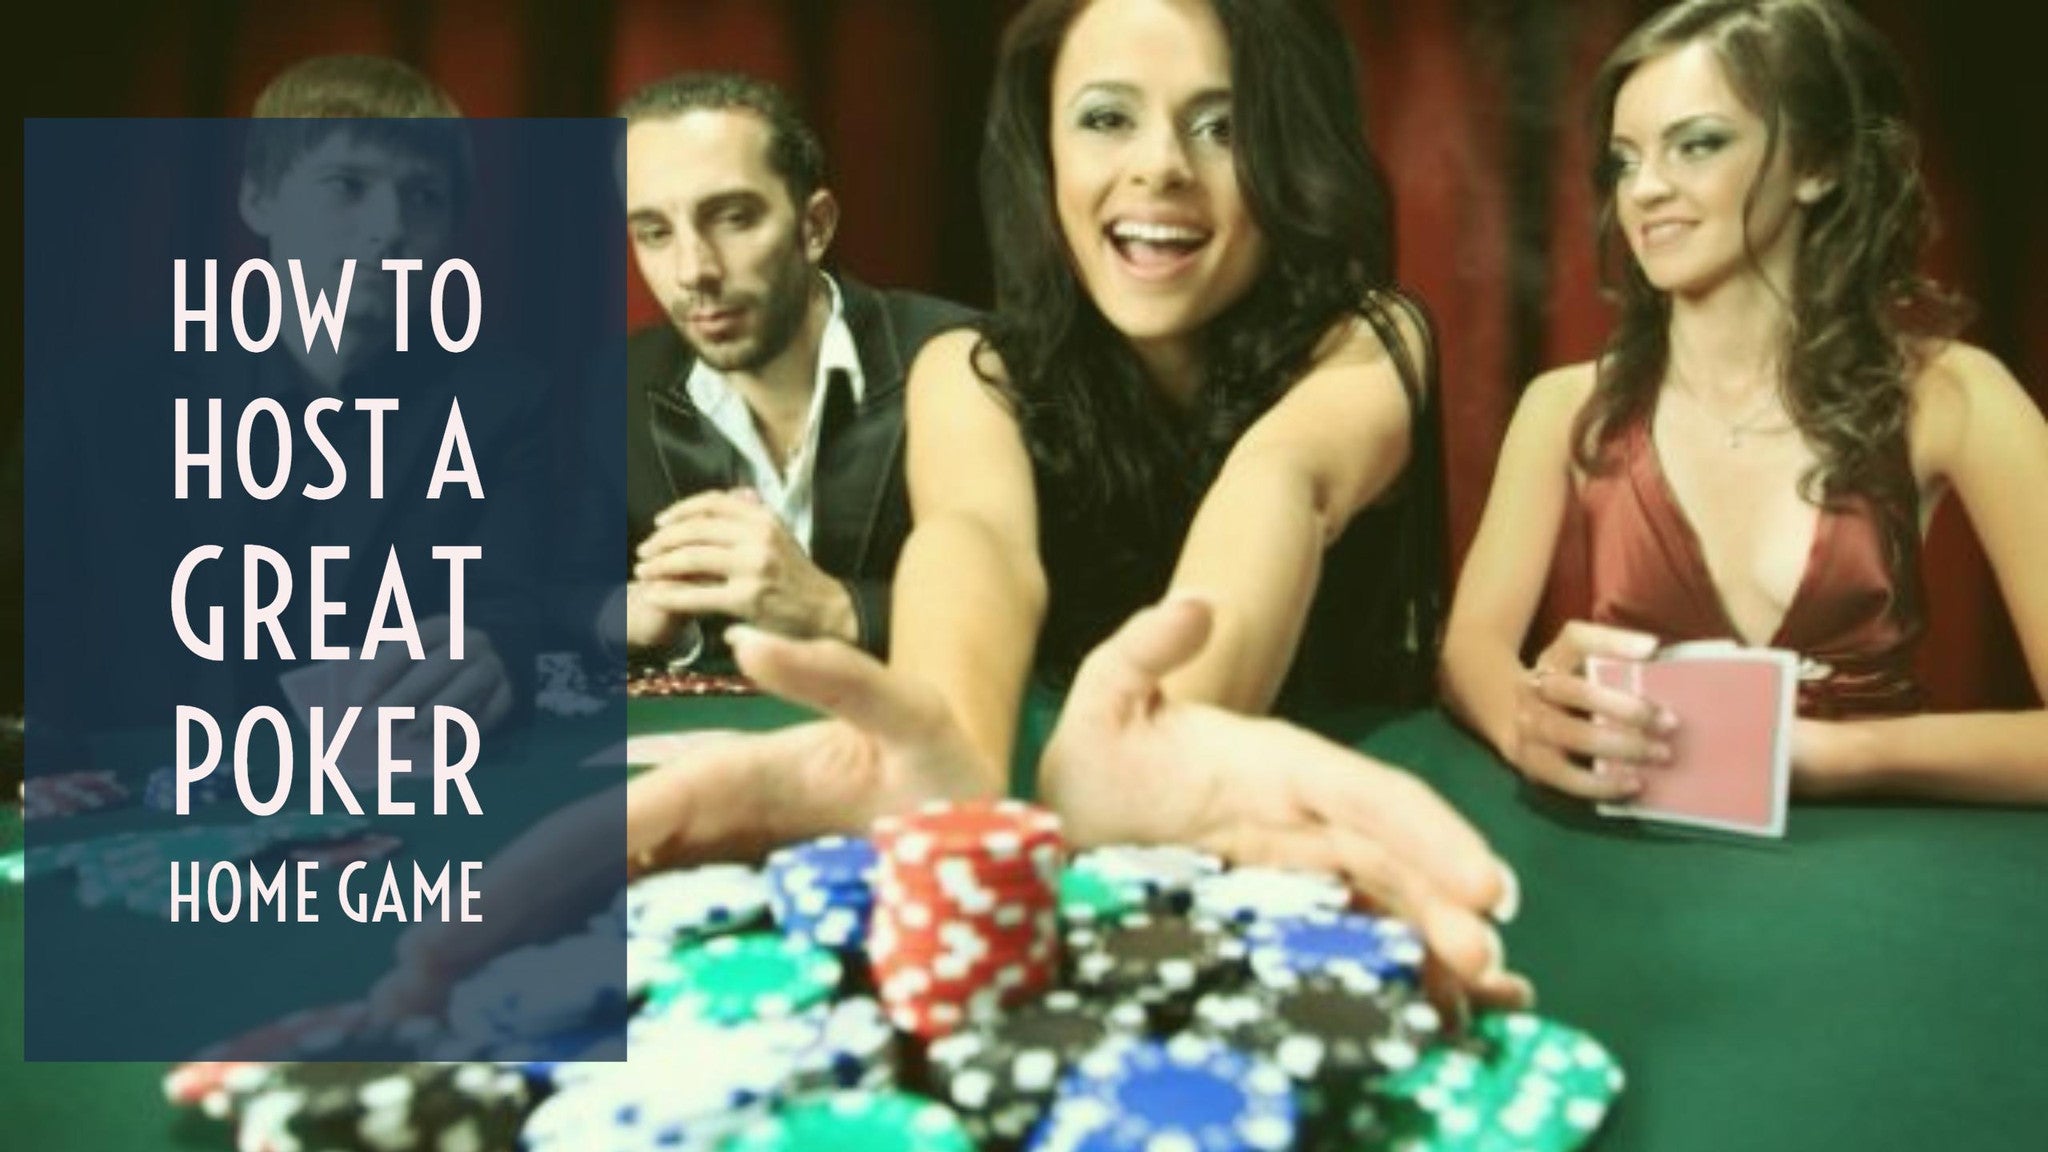 How to Host a Great Poker Home Game